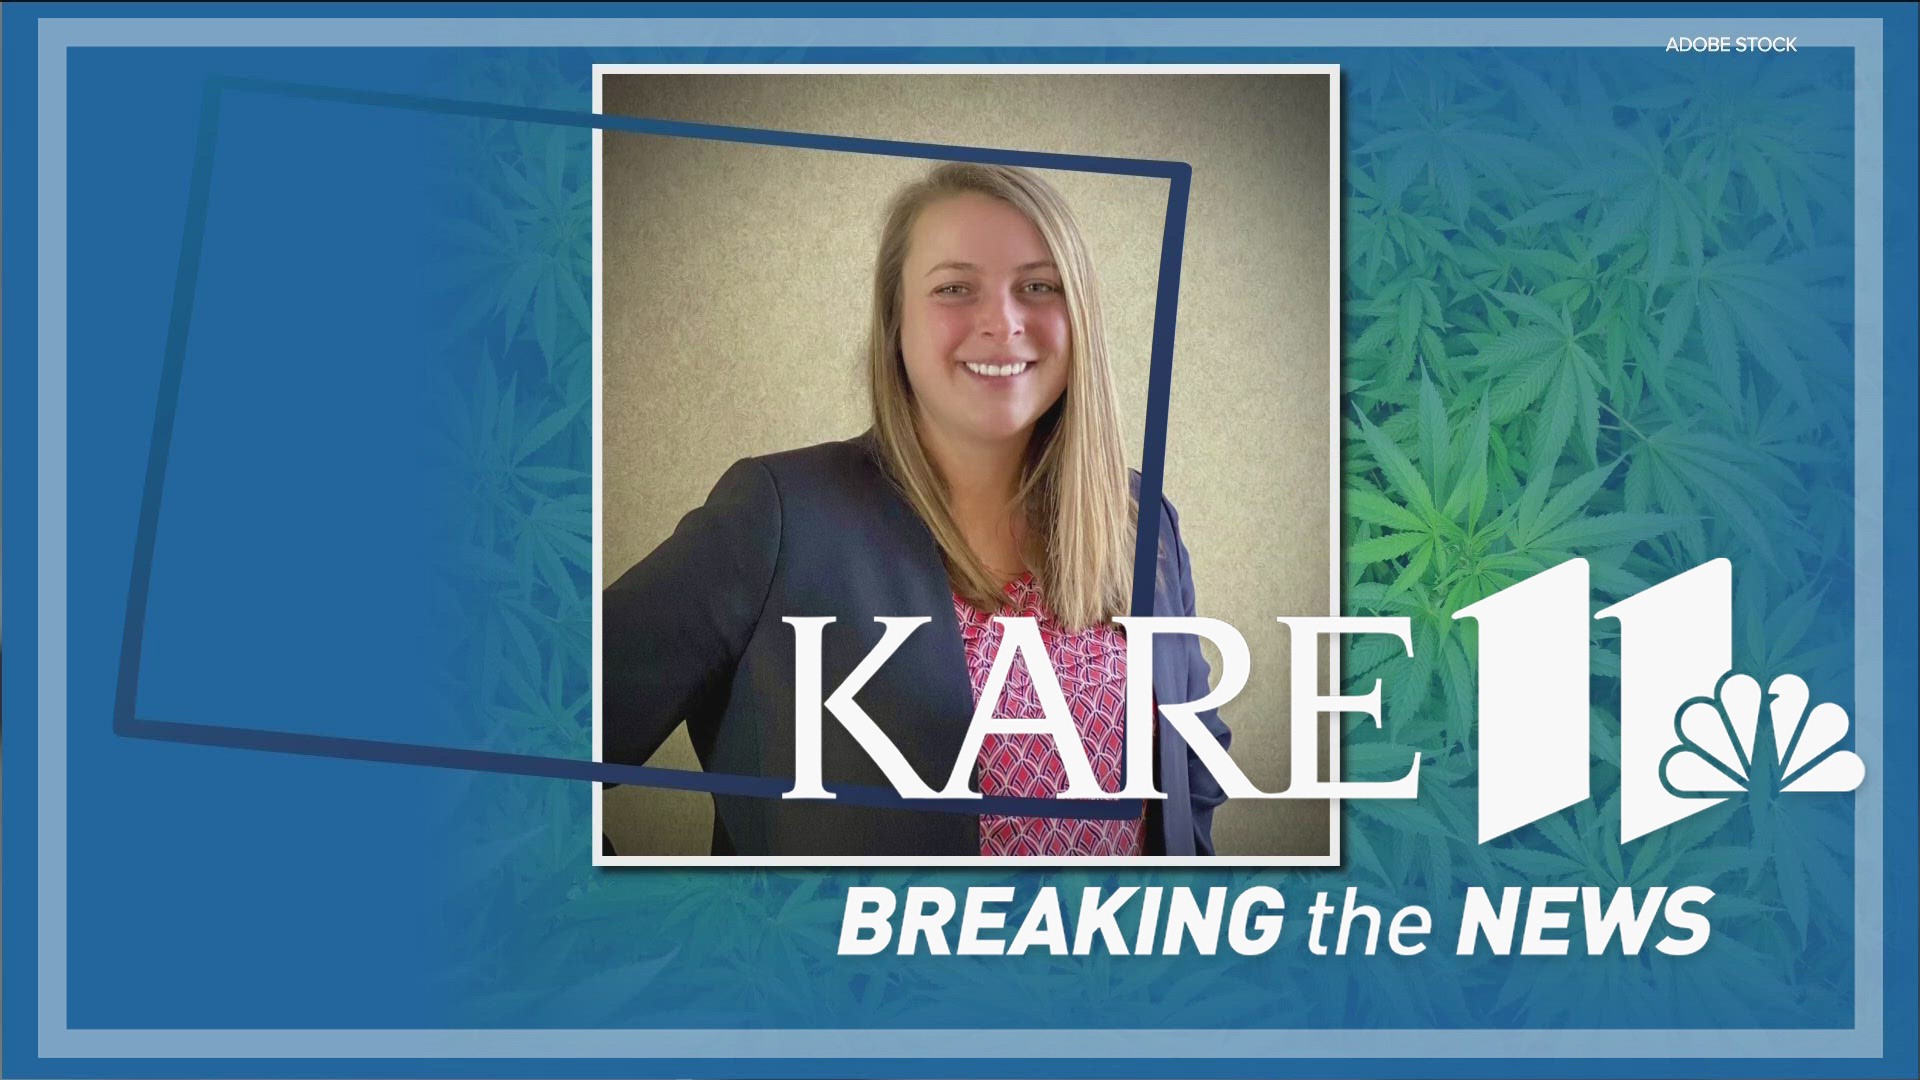 Krystal Gabel claims she was never asked to appear as a candidate for the Legal Marijuana Now Party.